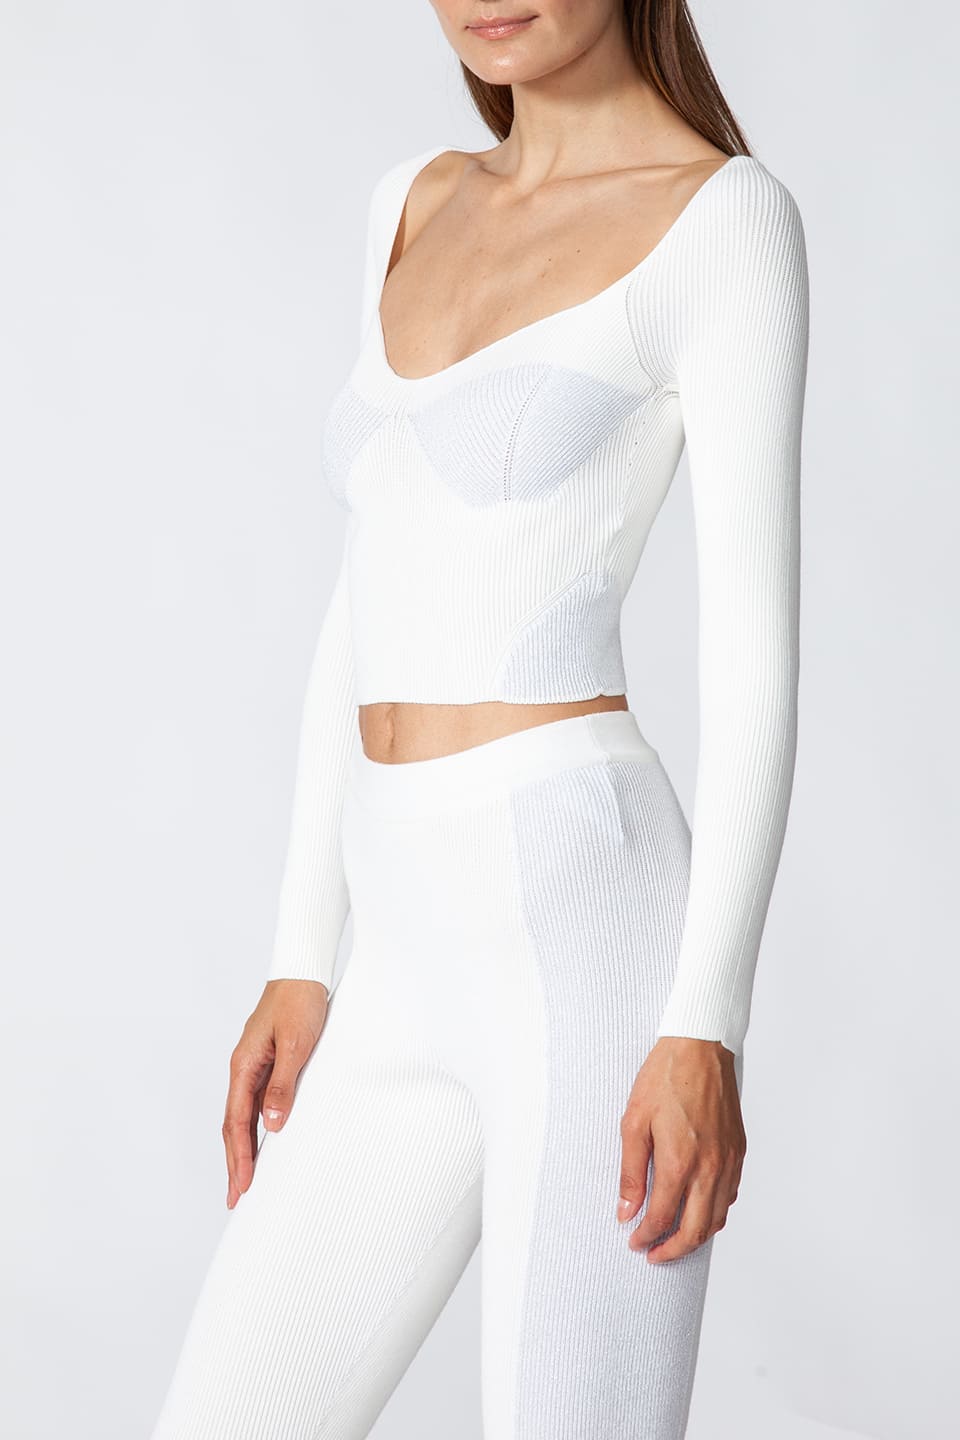 Model in pose from a side while wearing fashion artist Kukhareva London's trendy white top, with cut out neckline and inserts threaded with metallic, shimmering yarn.